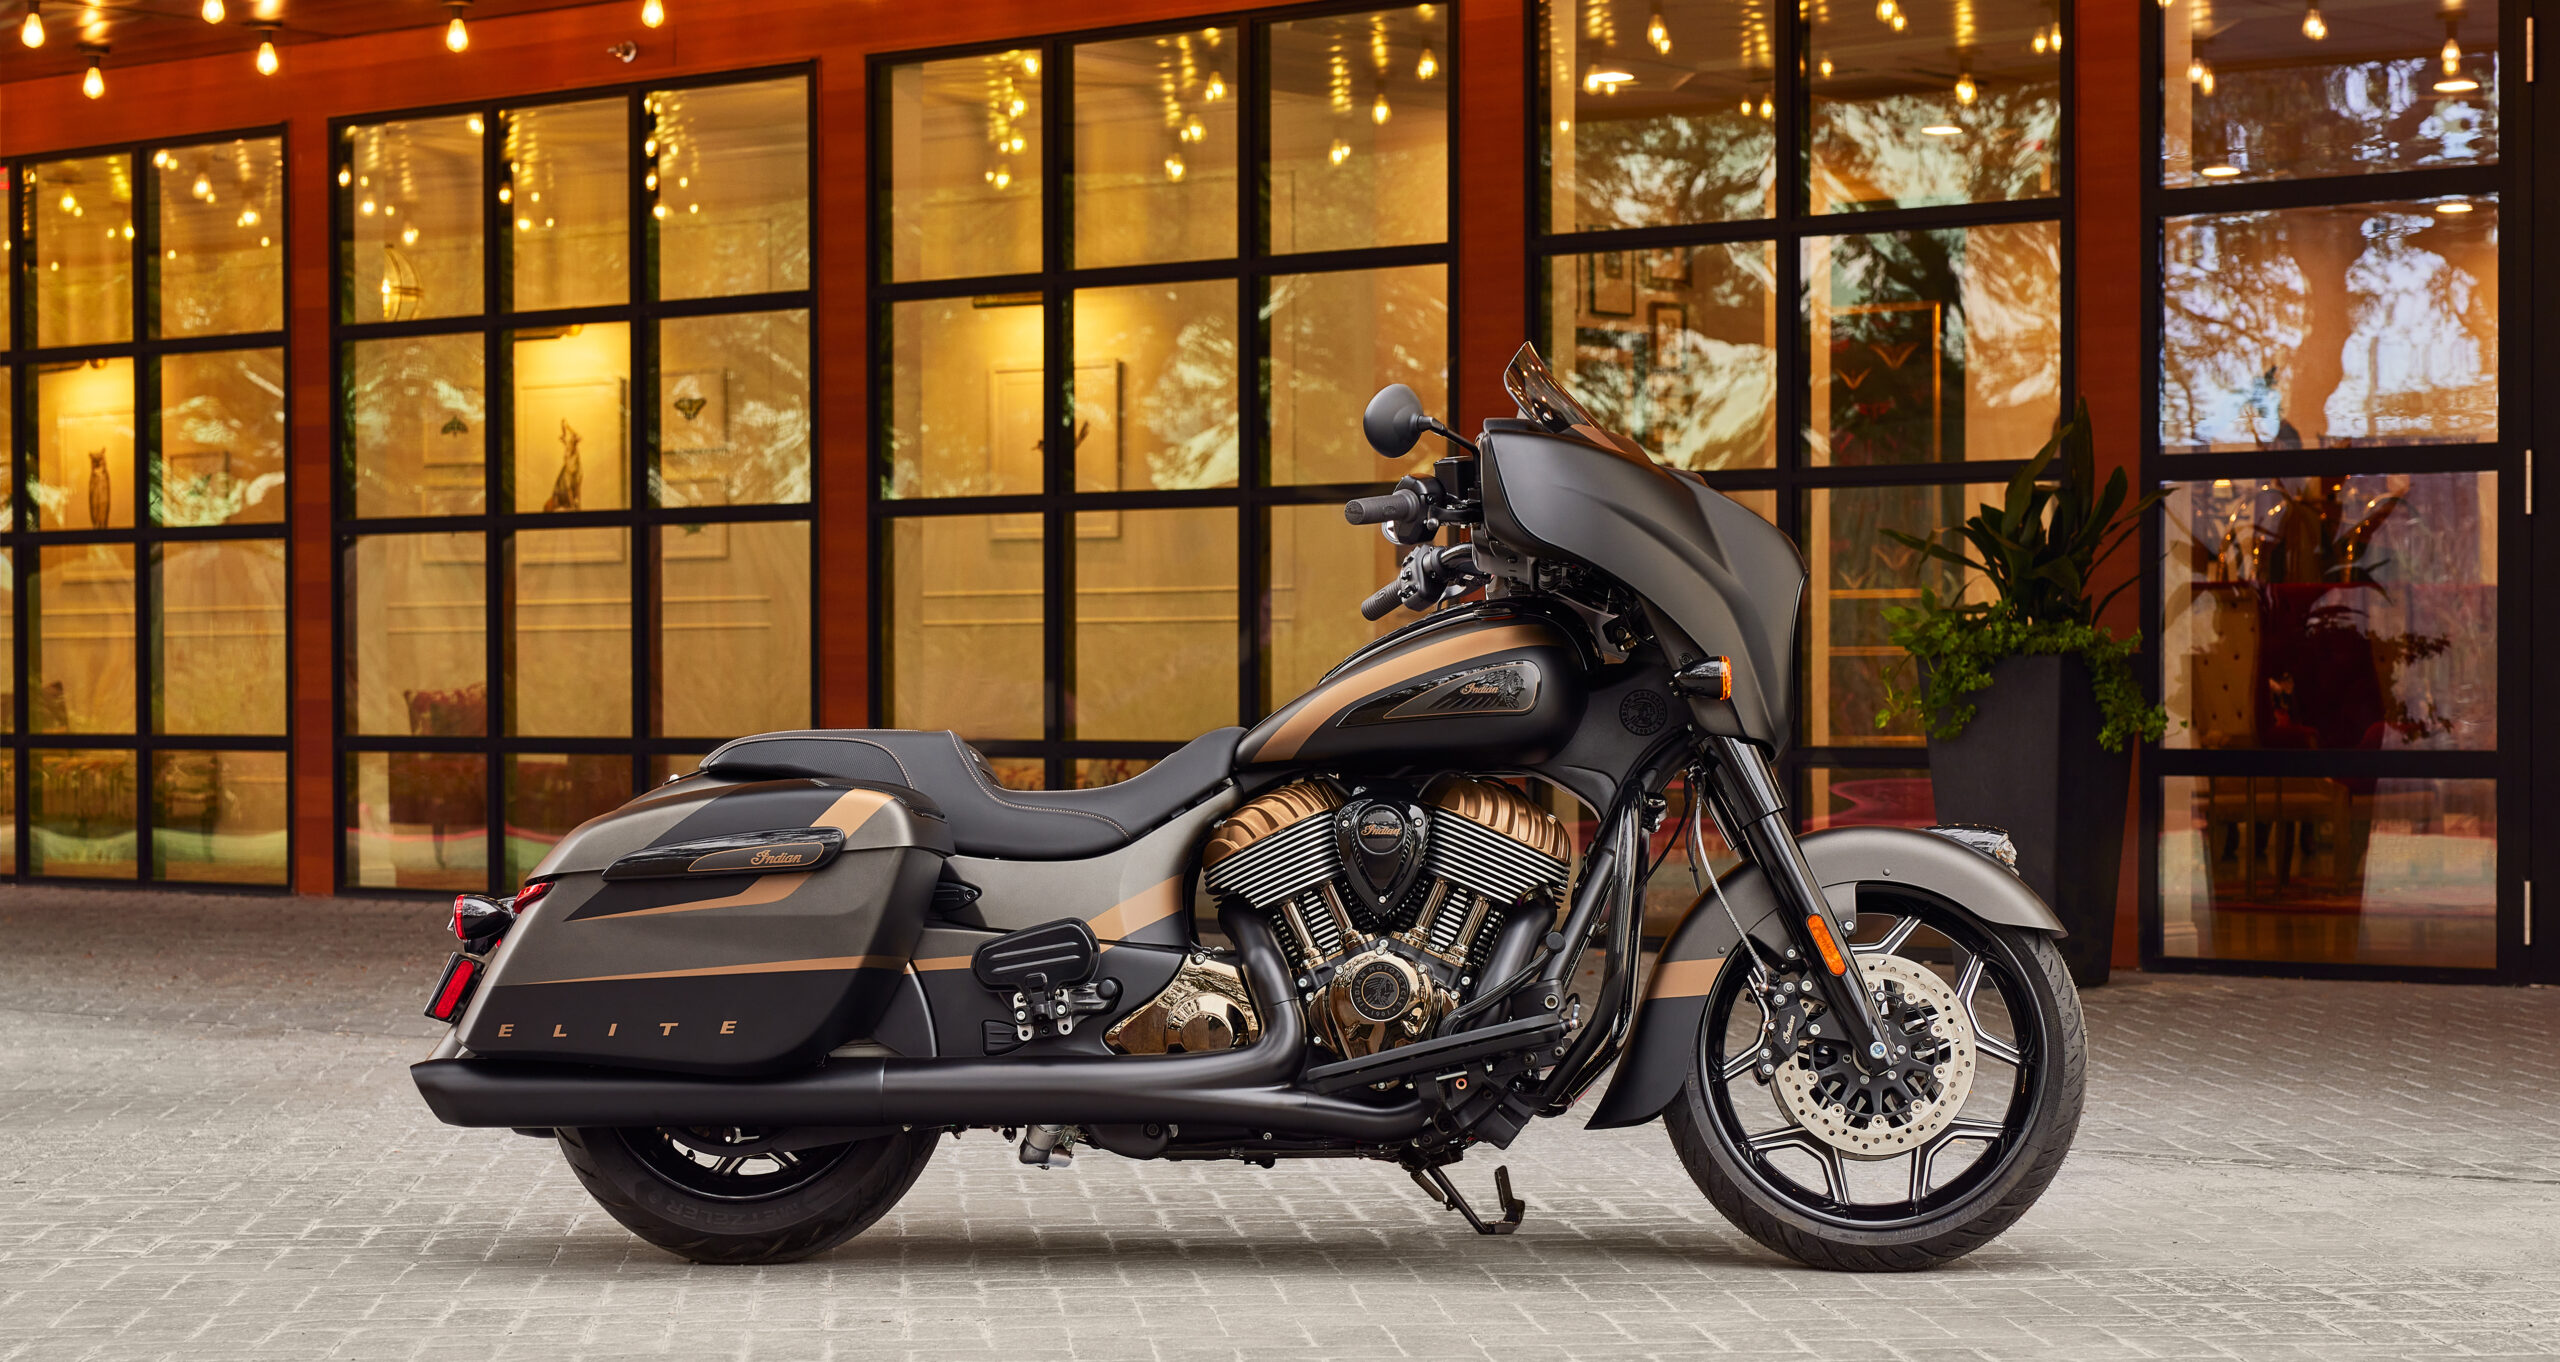 Indian Motorcycle launches limited-edition motorcycle models